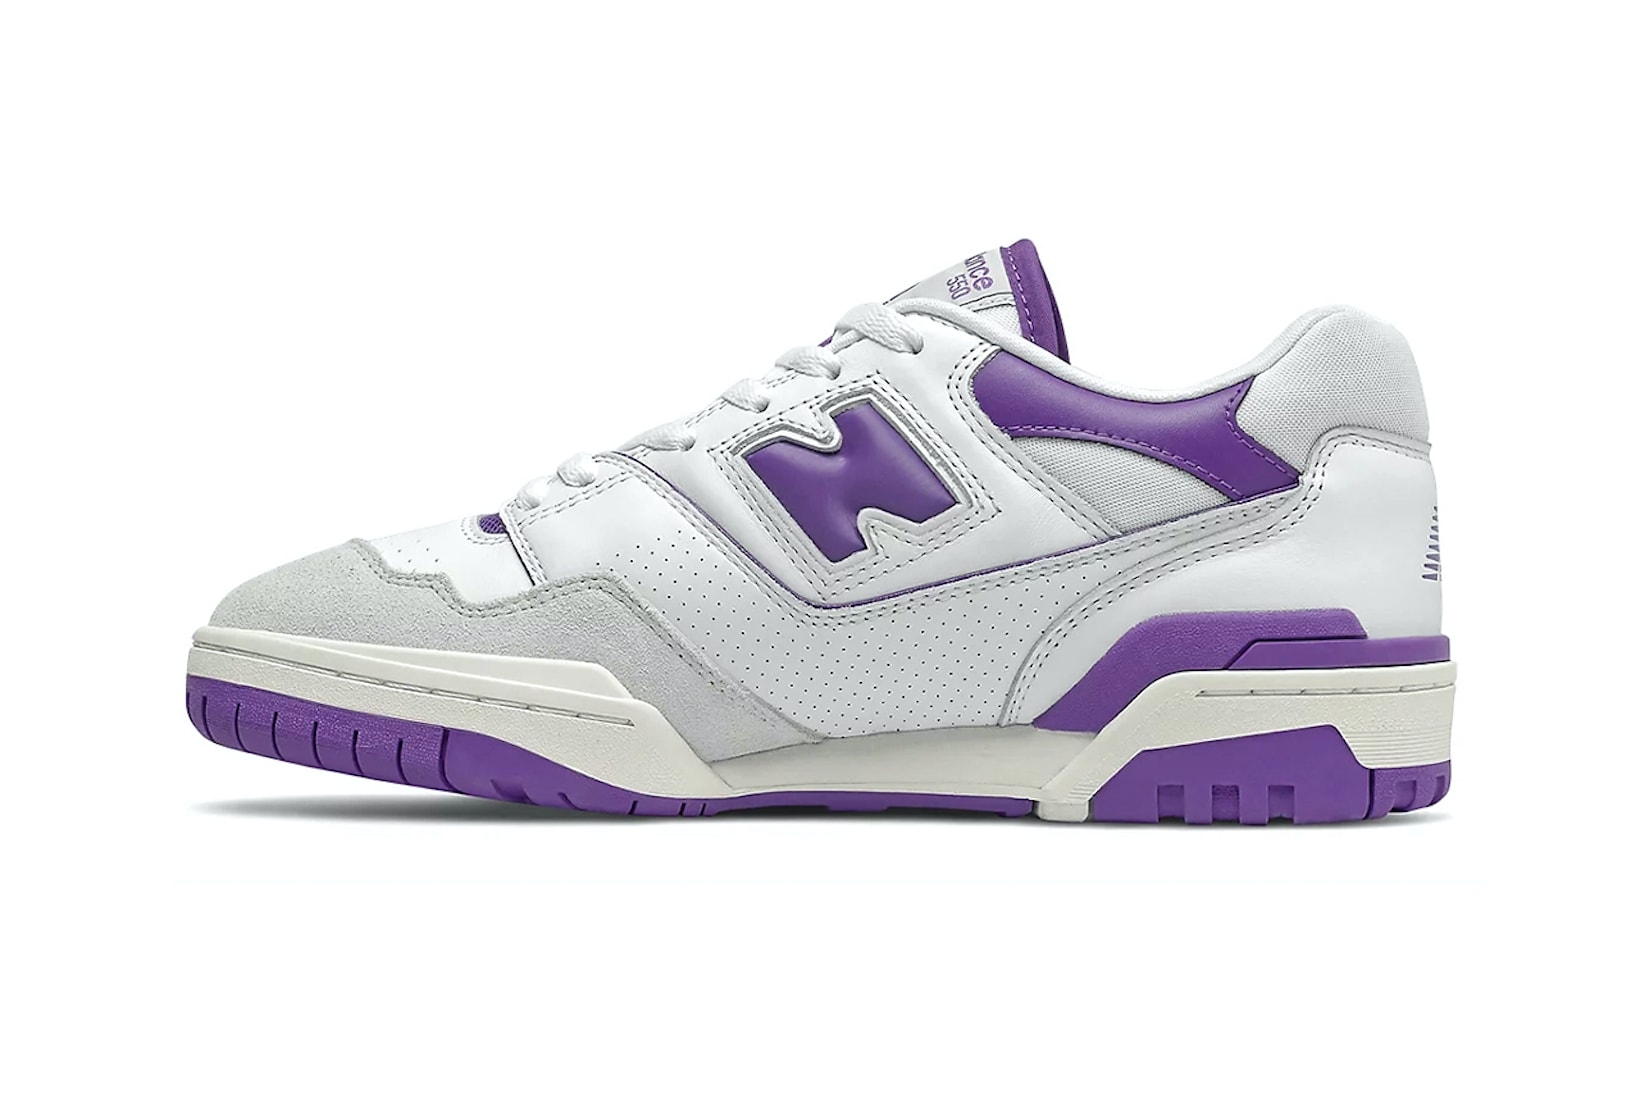 new balance nb 550 purple white colorway sneakers footwear kicks shoes lateral